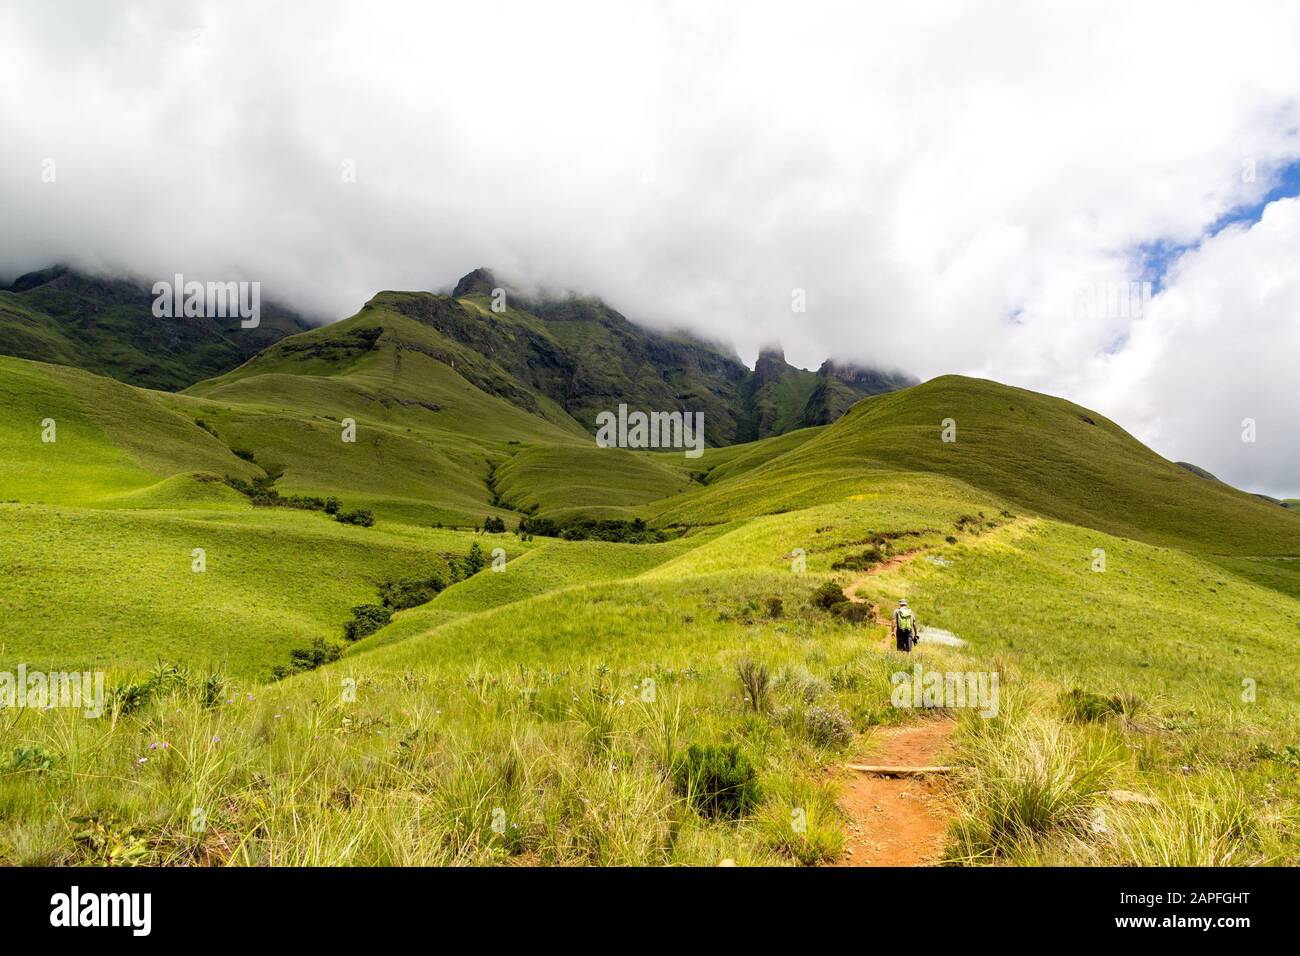 A hiking man on a small path leading to Blindman's Corner, green meadows and soft green mountains, Monk's Cowl, Champagne Castle and Cathkin Peak shro Stock Photo